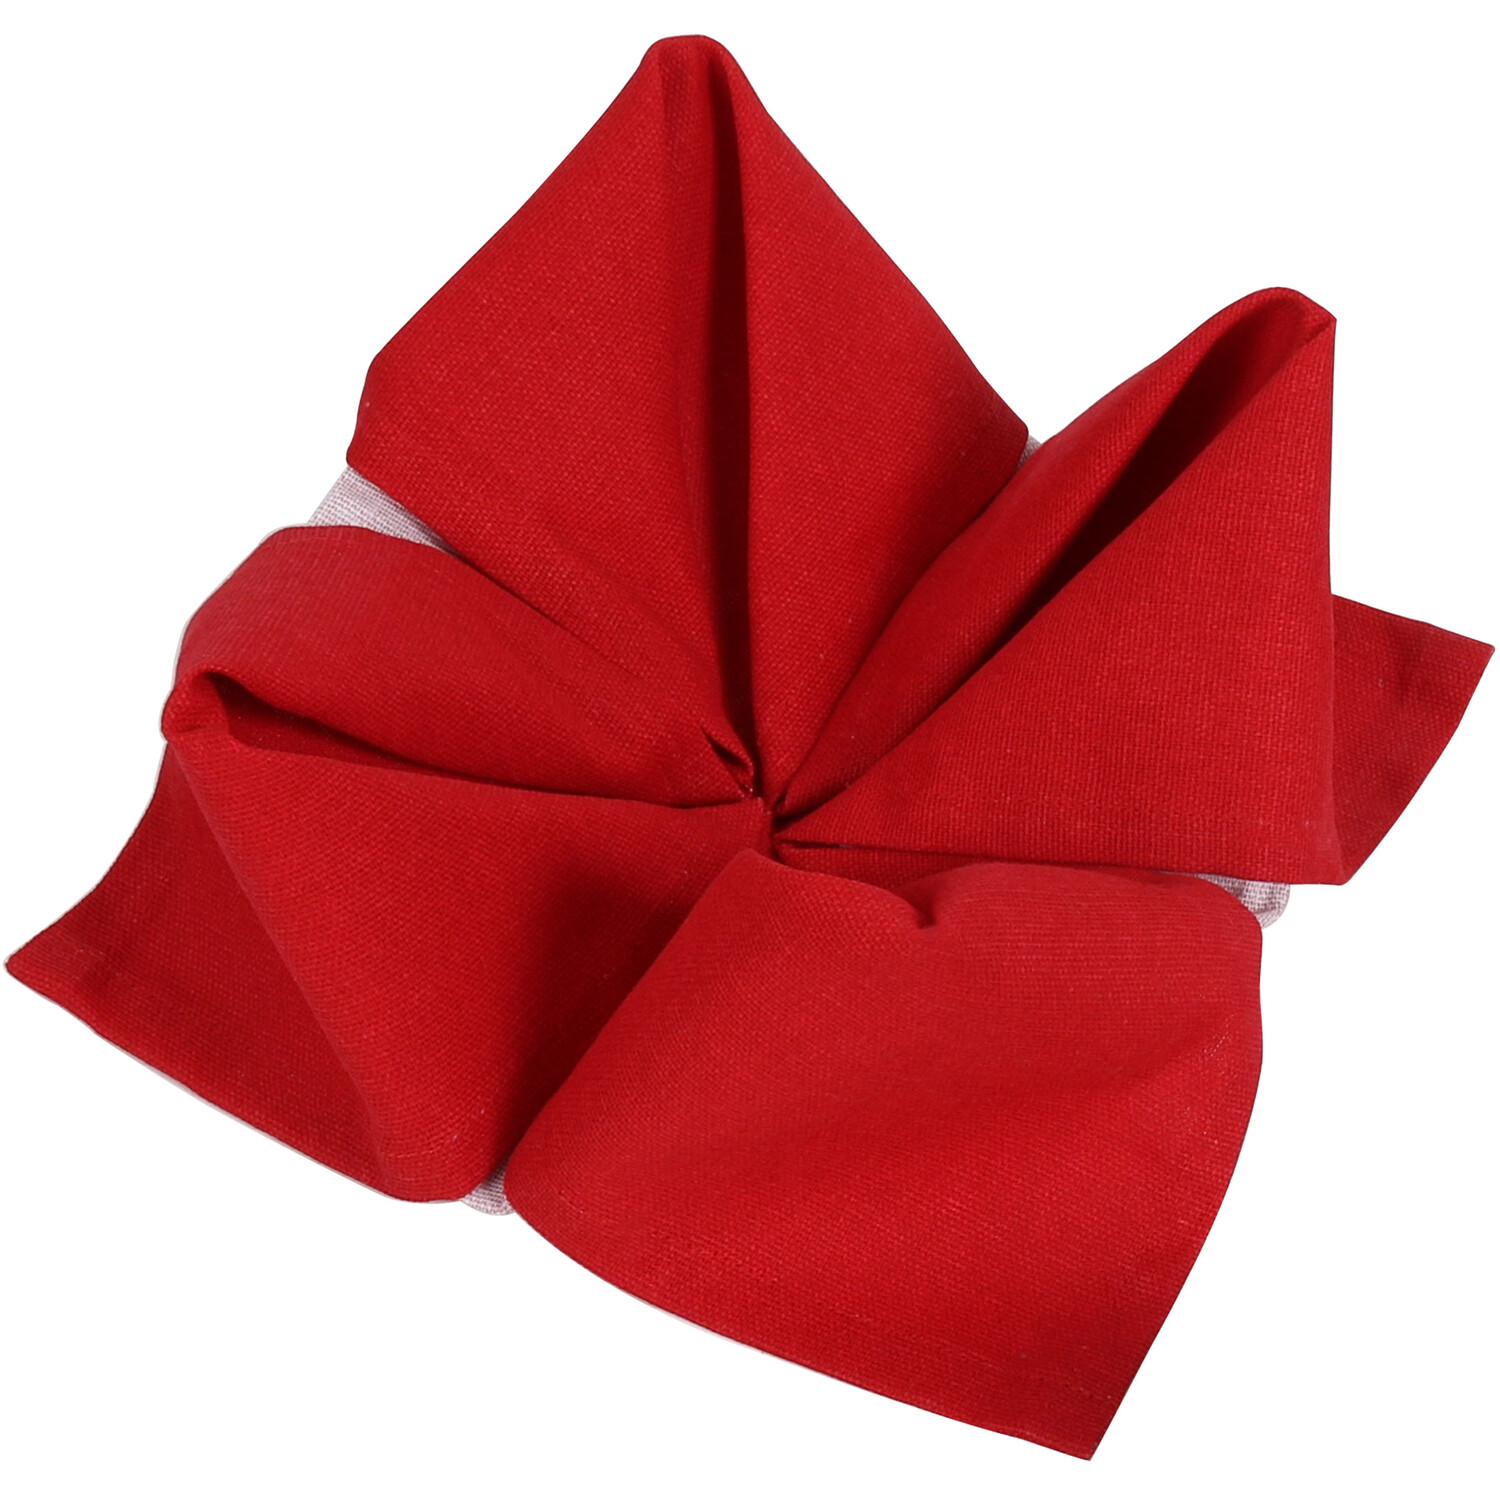 Pack of 2 Strawberry Napkins - Red Image 5